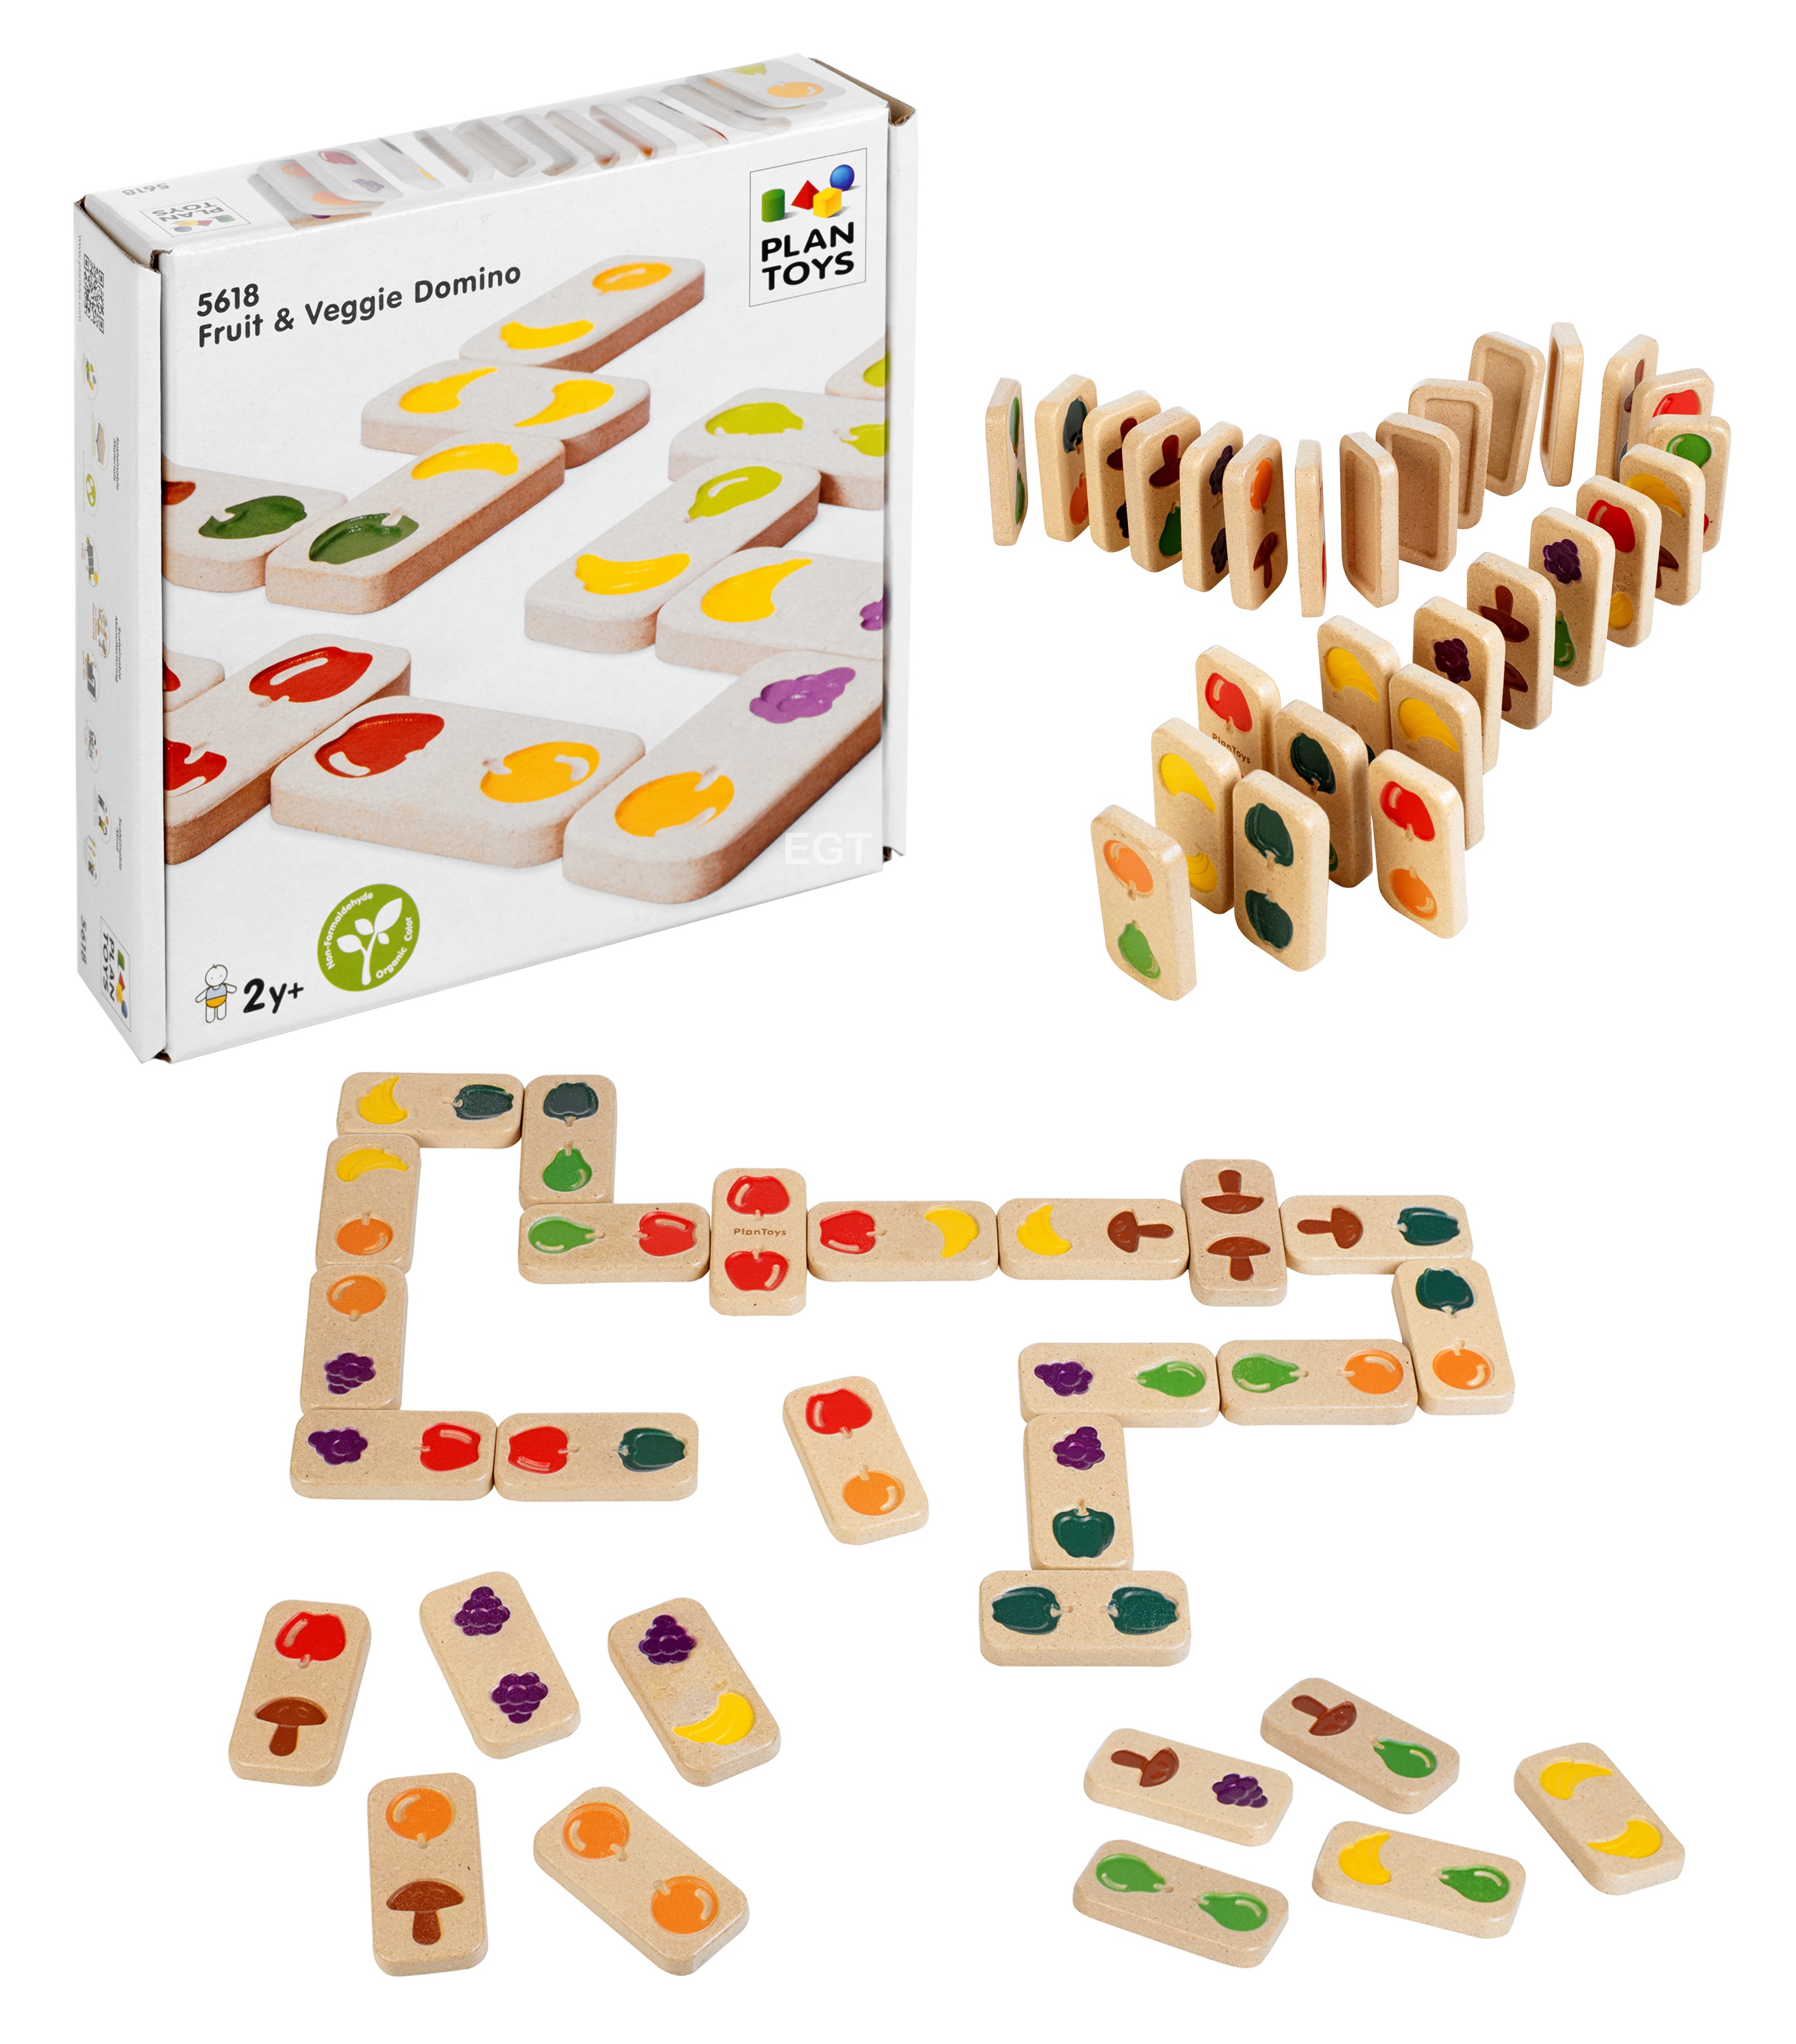 ... Wooden Fruit &amp; Veg Dominoes Game Play Wood Kids Gift Toy Educational